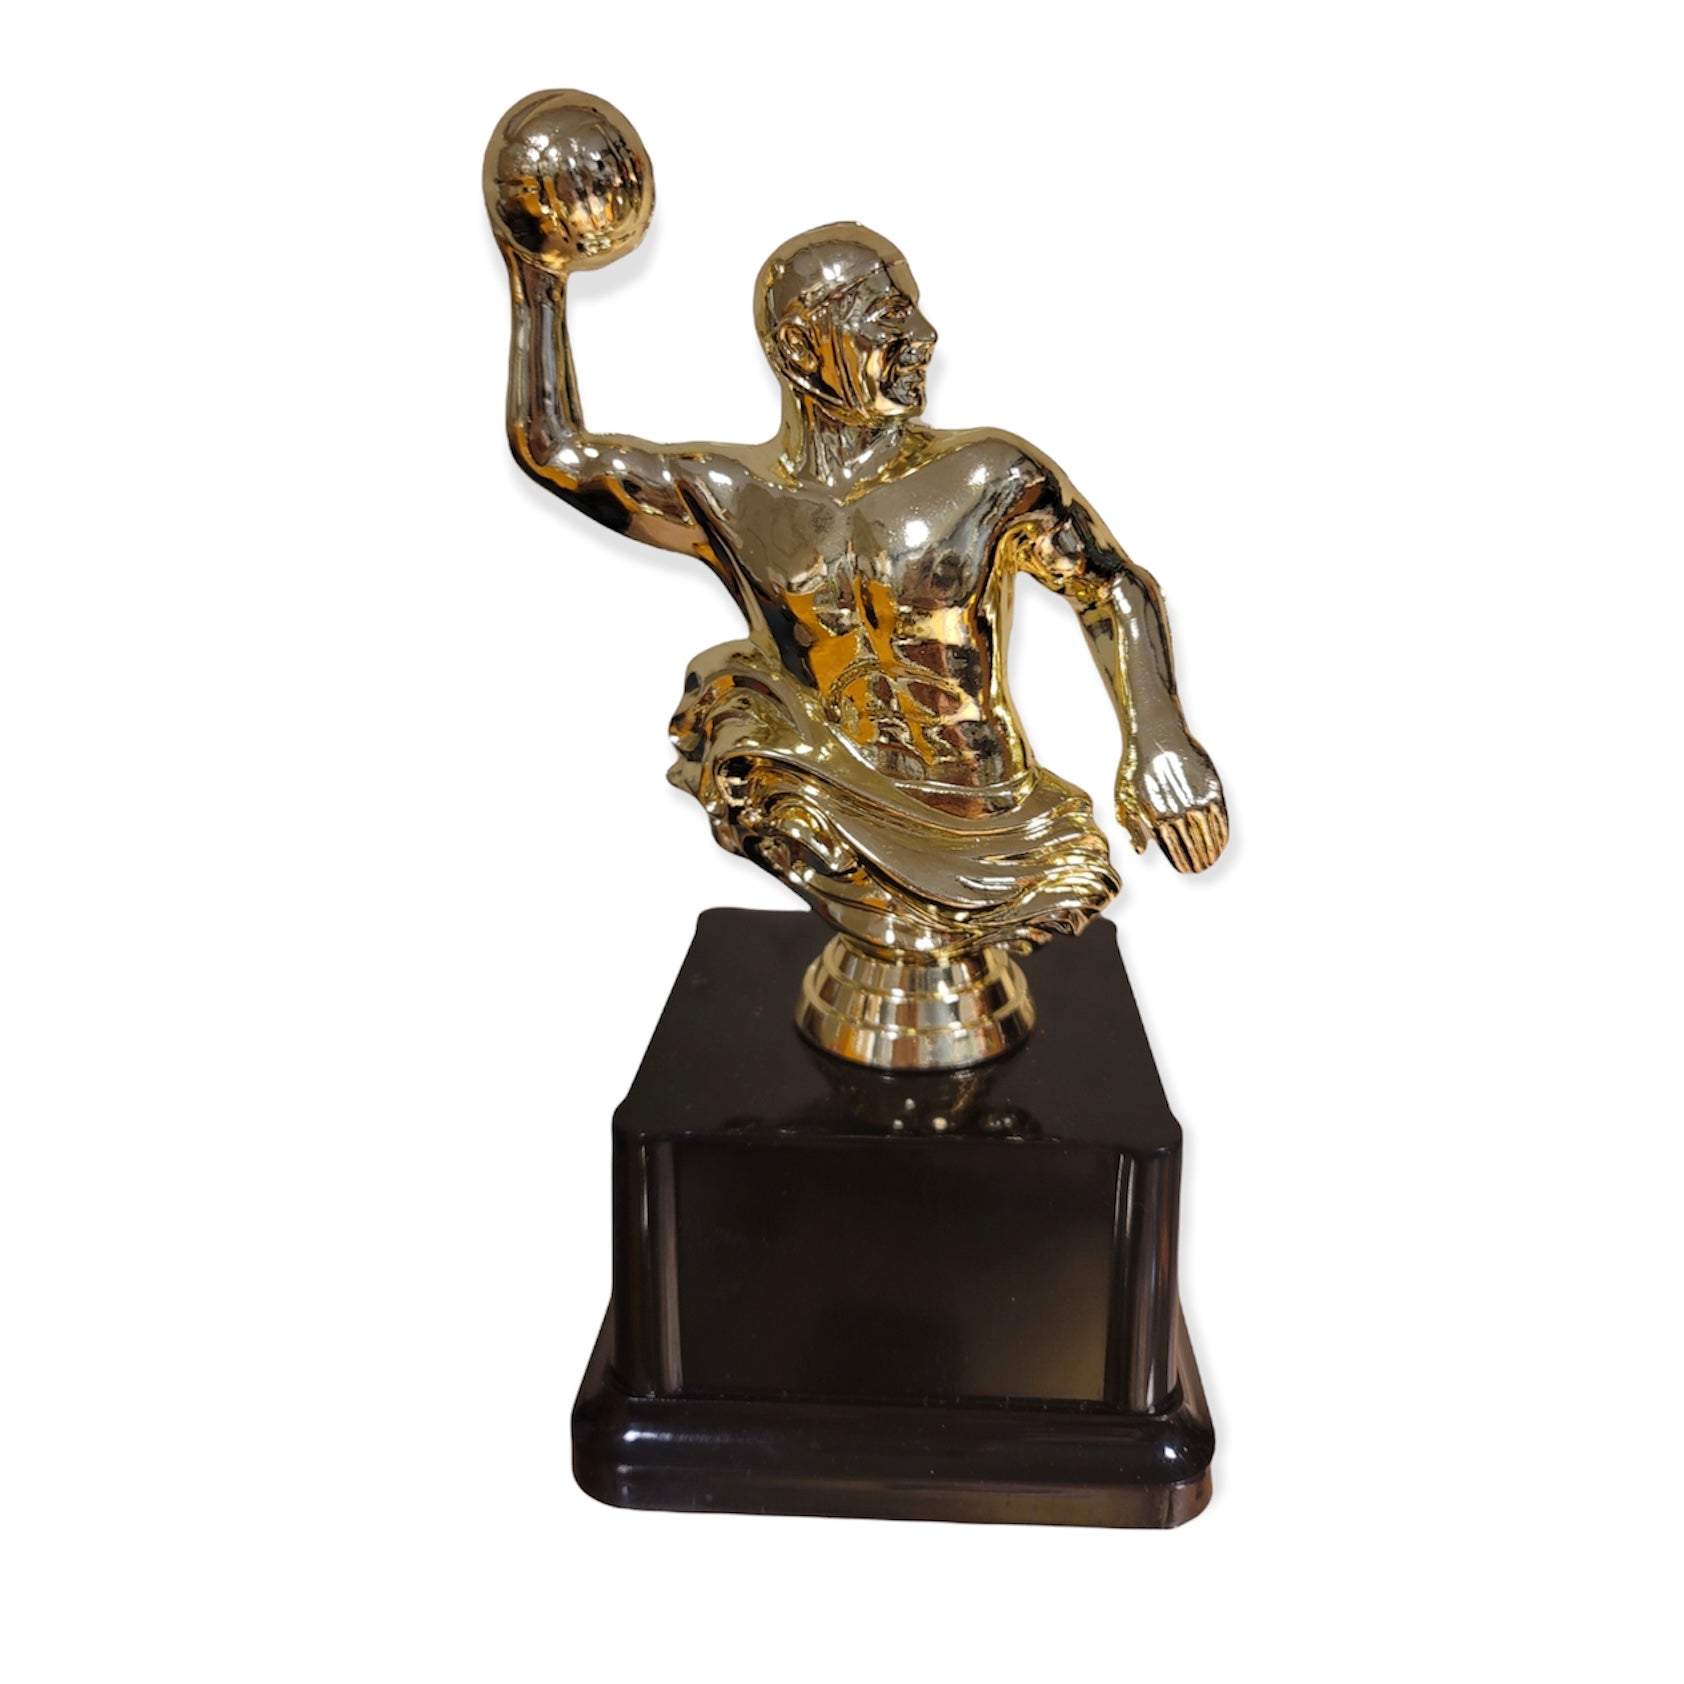 gold water polo figure on black base with free engraved plate